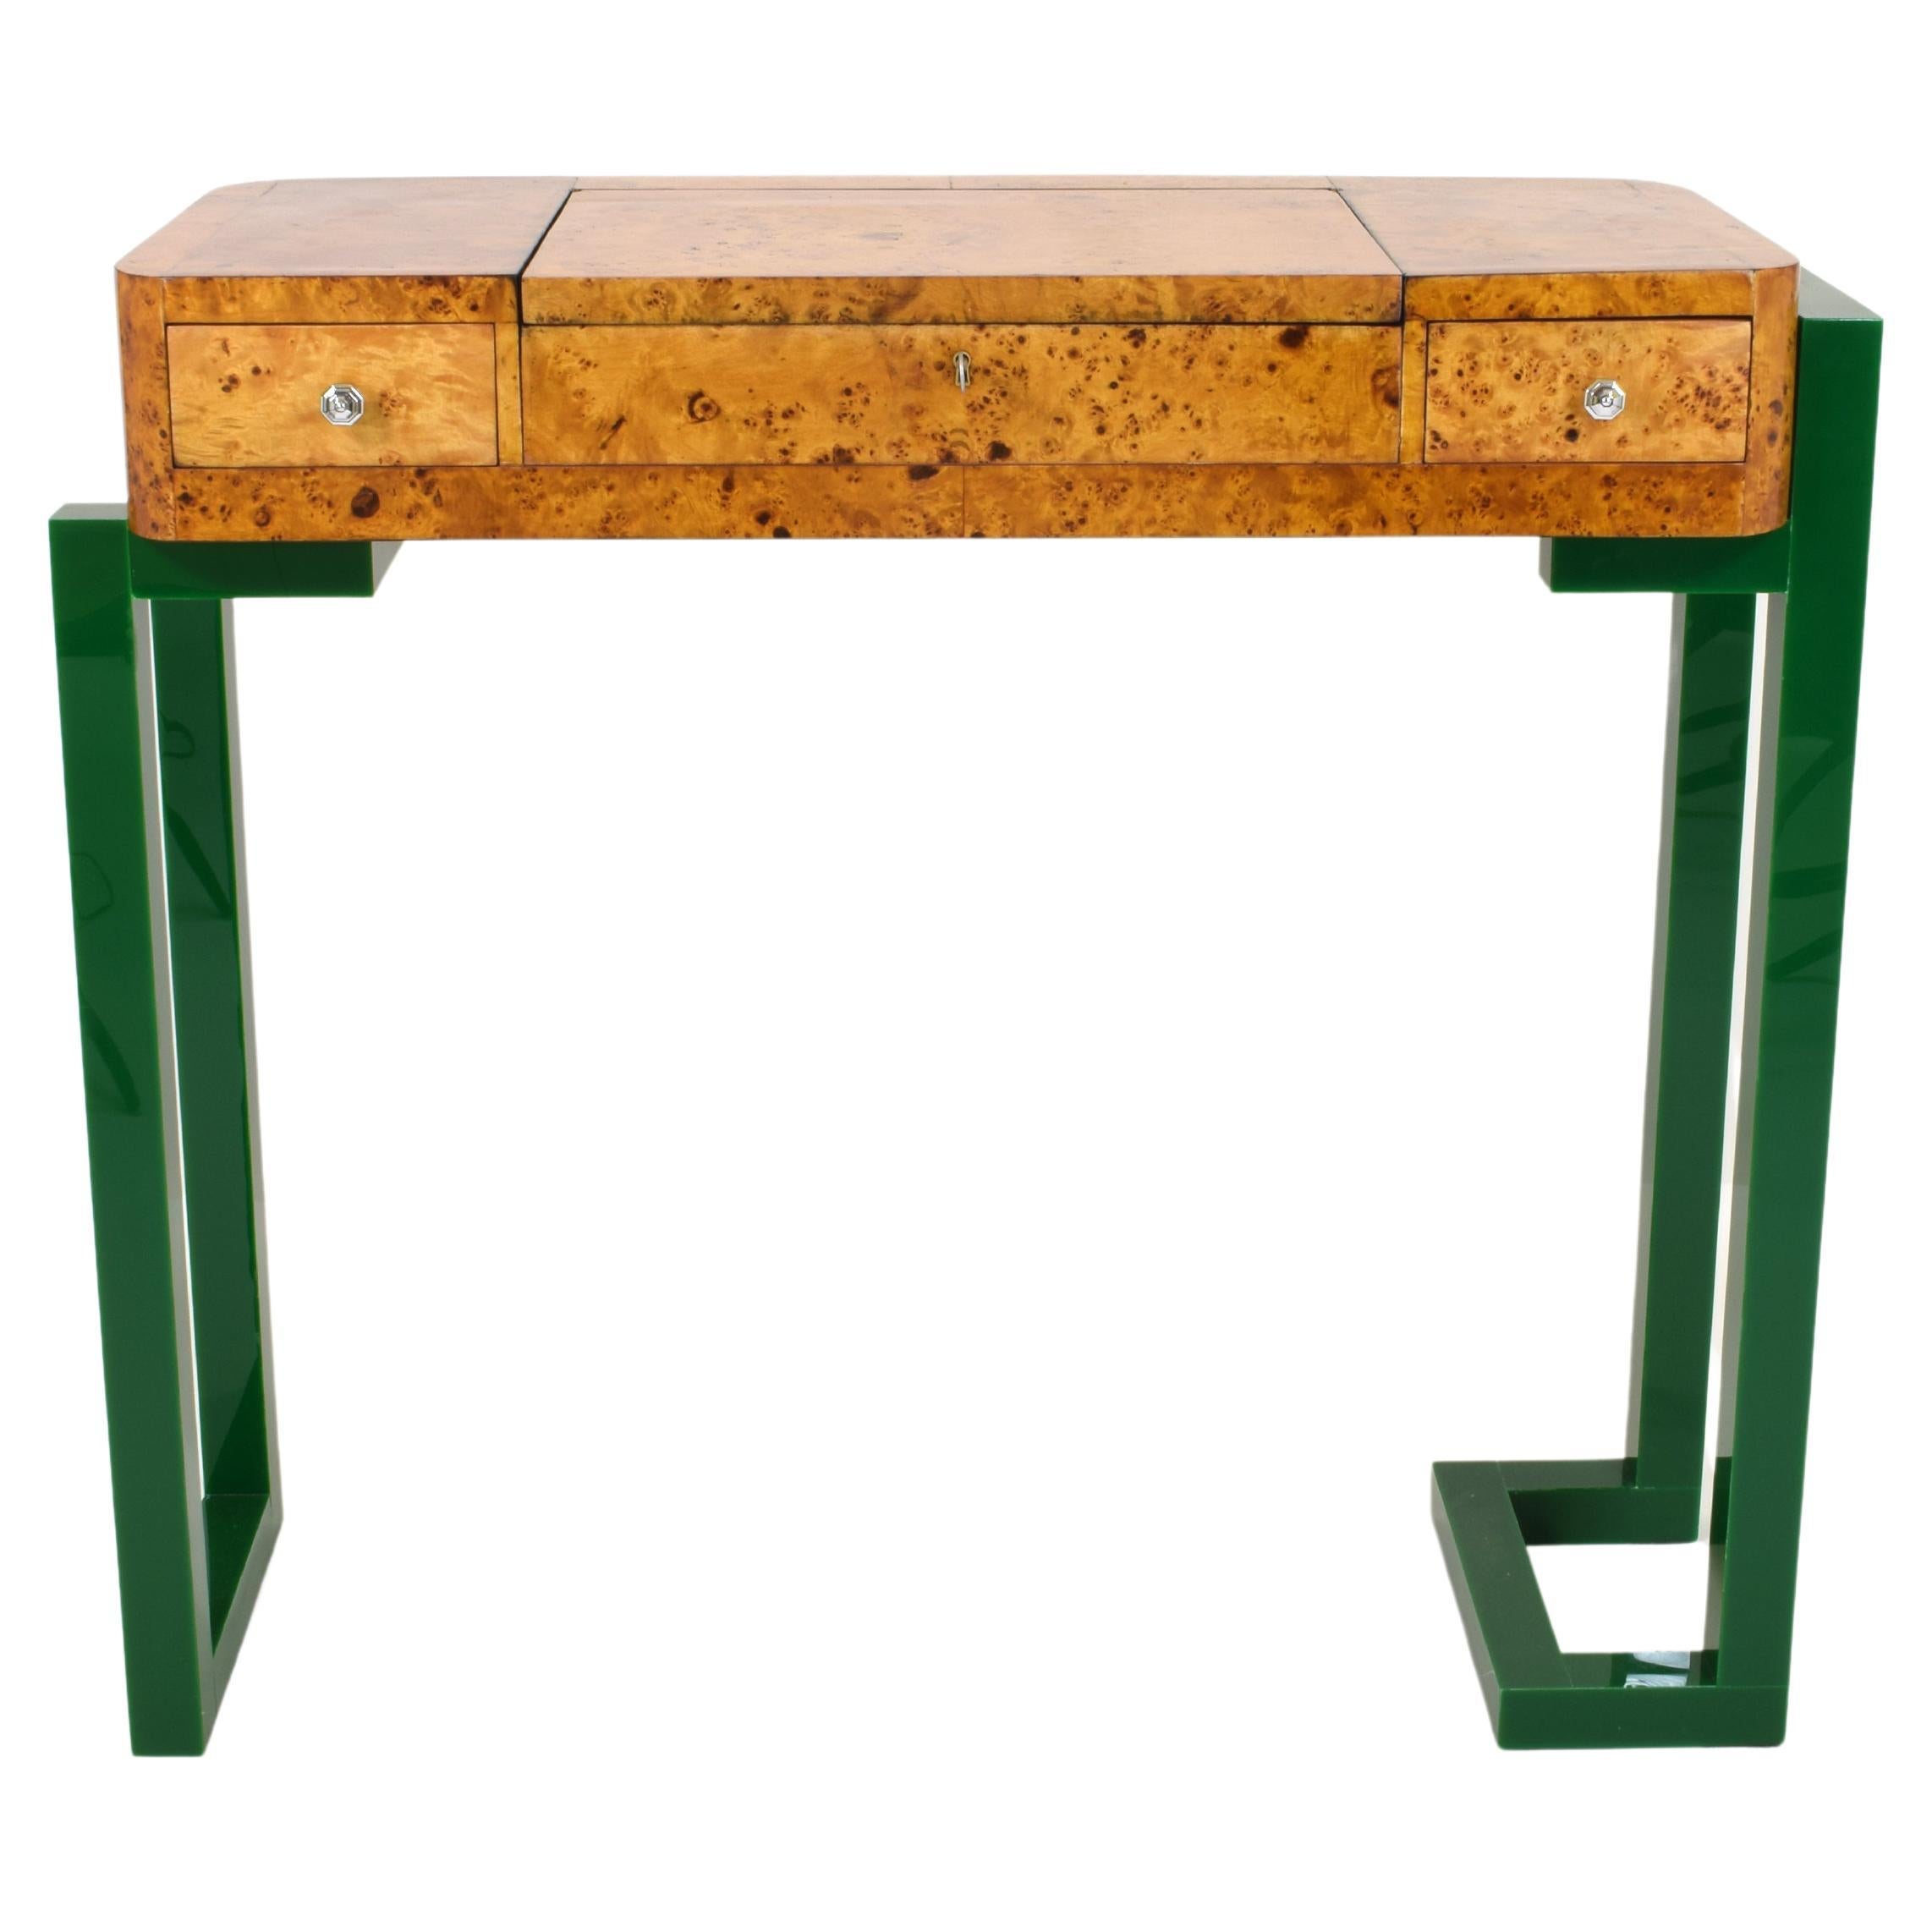 Console “Flamant Vert” from “Trasformatio” Collection, Italy, 1930/2022